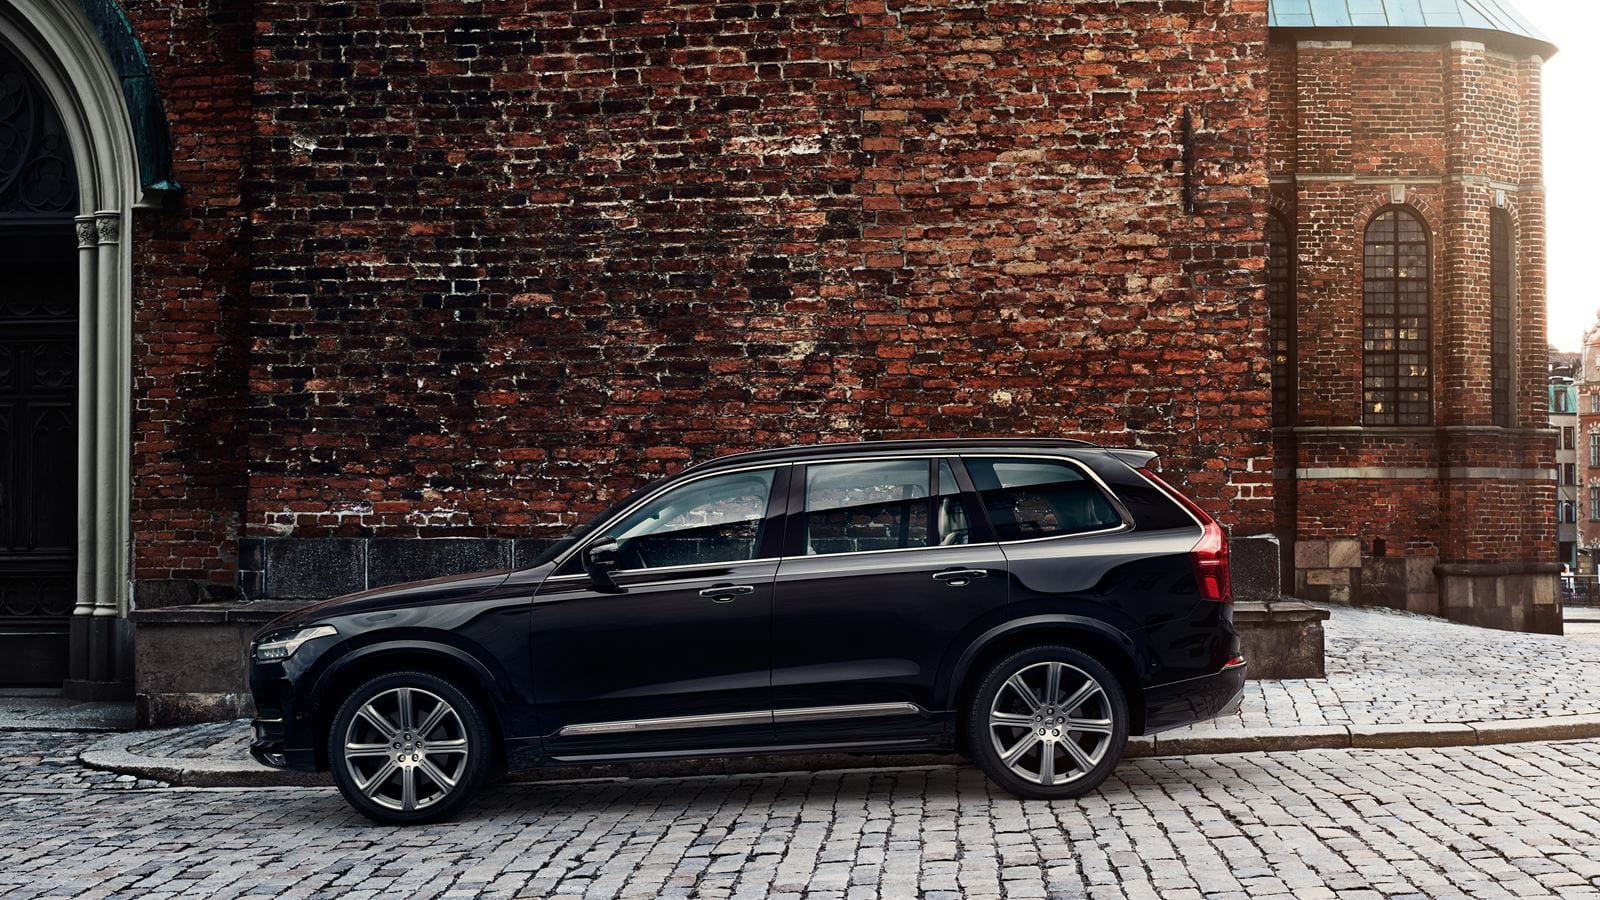 Volvo Xc90 Wallpaper Vehicles Hq Pictures 4k